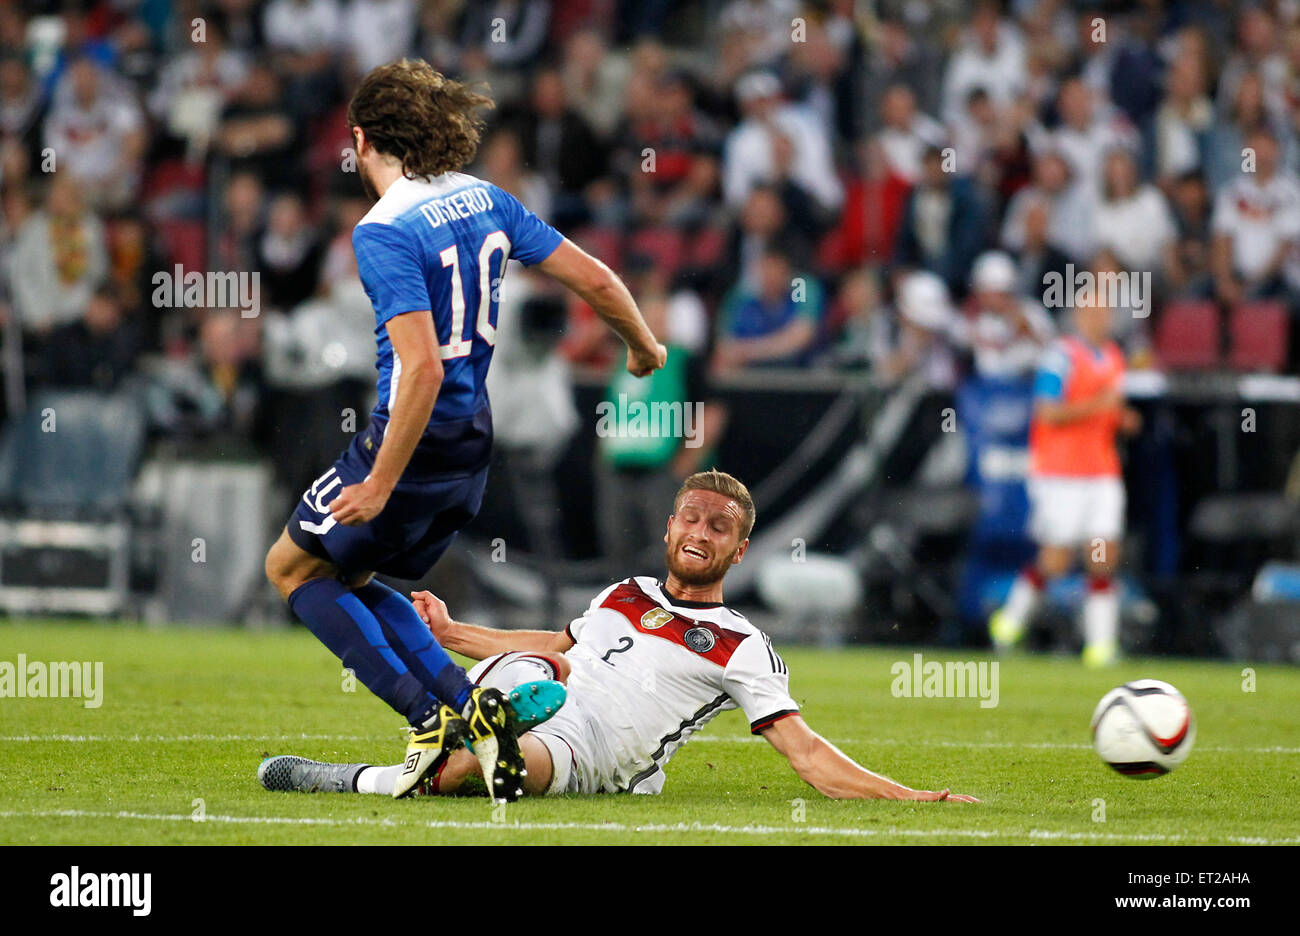 Cologne, Germany. 10th June, 2015. Germany's Shkodran Mustafi (R) against Mix Diskerud (USA) during the friendly match between Germany and USA, RheinEnergieStadion on June 10., 2015. Credit:  dpa picture alliance/Alamy Live News Stock Photo